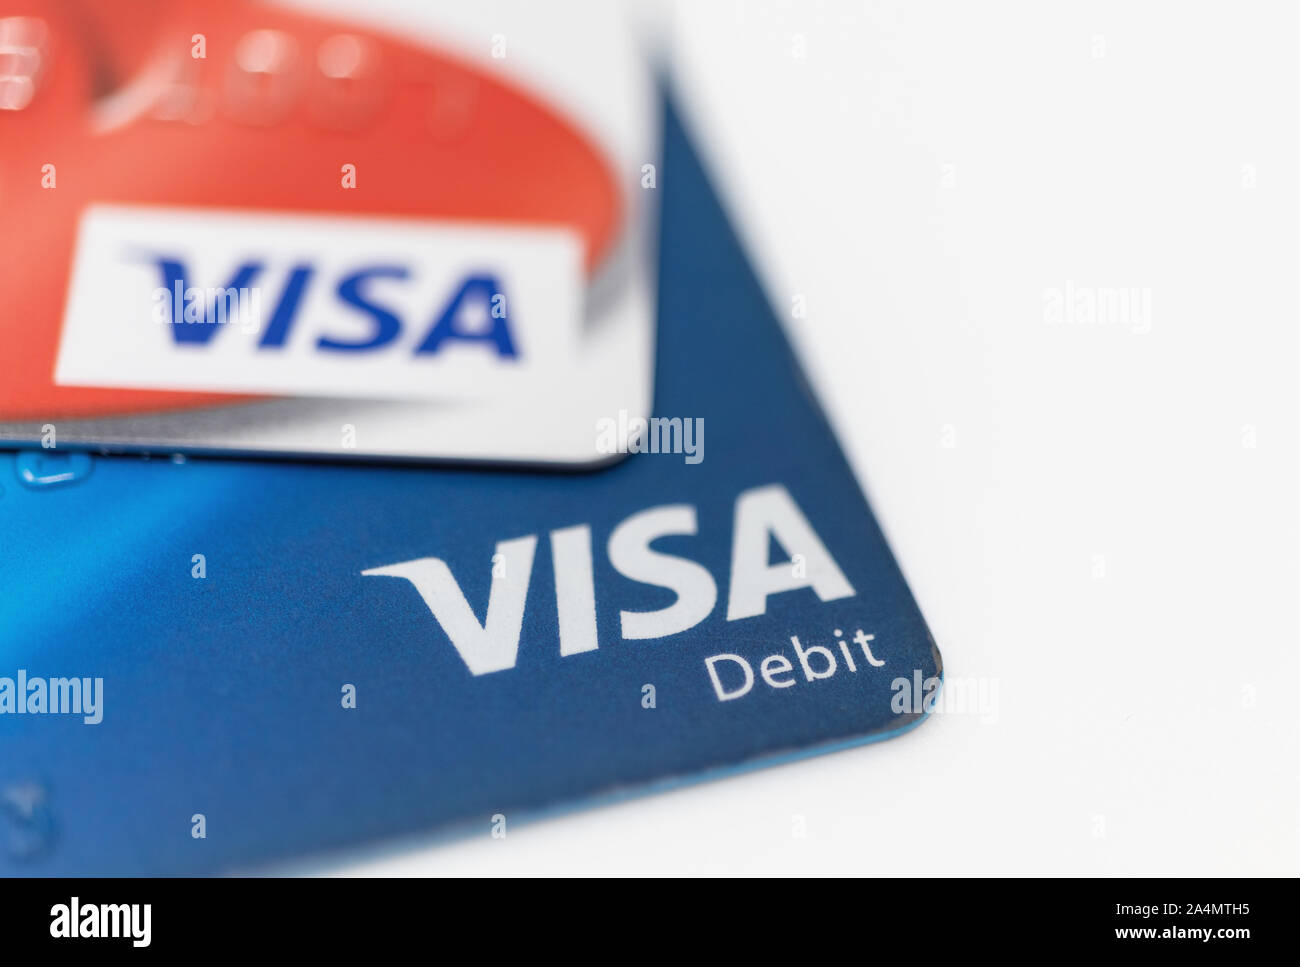 London / UK - October 9th 2019 - VISA logo on bank cards, closeup macro view with a shallow depth of field Stock Photo